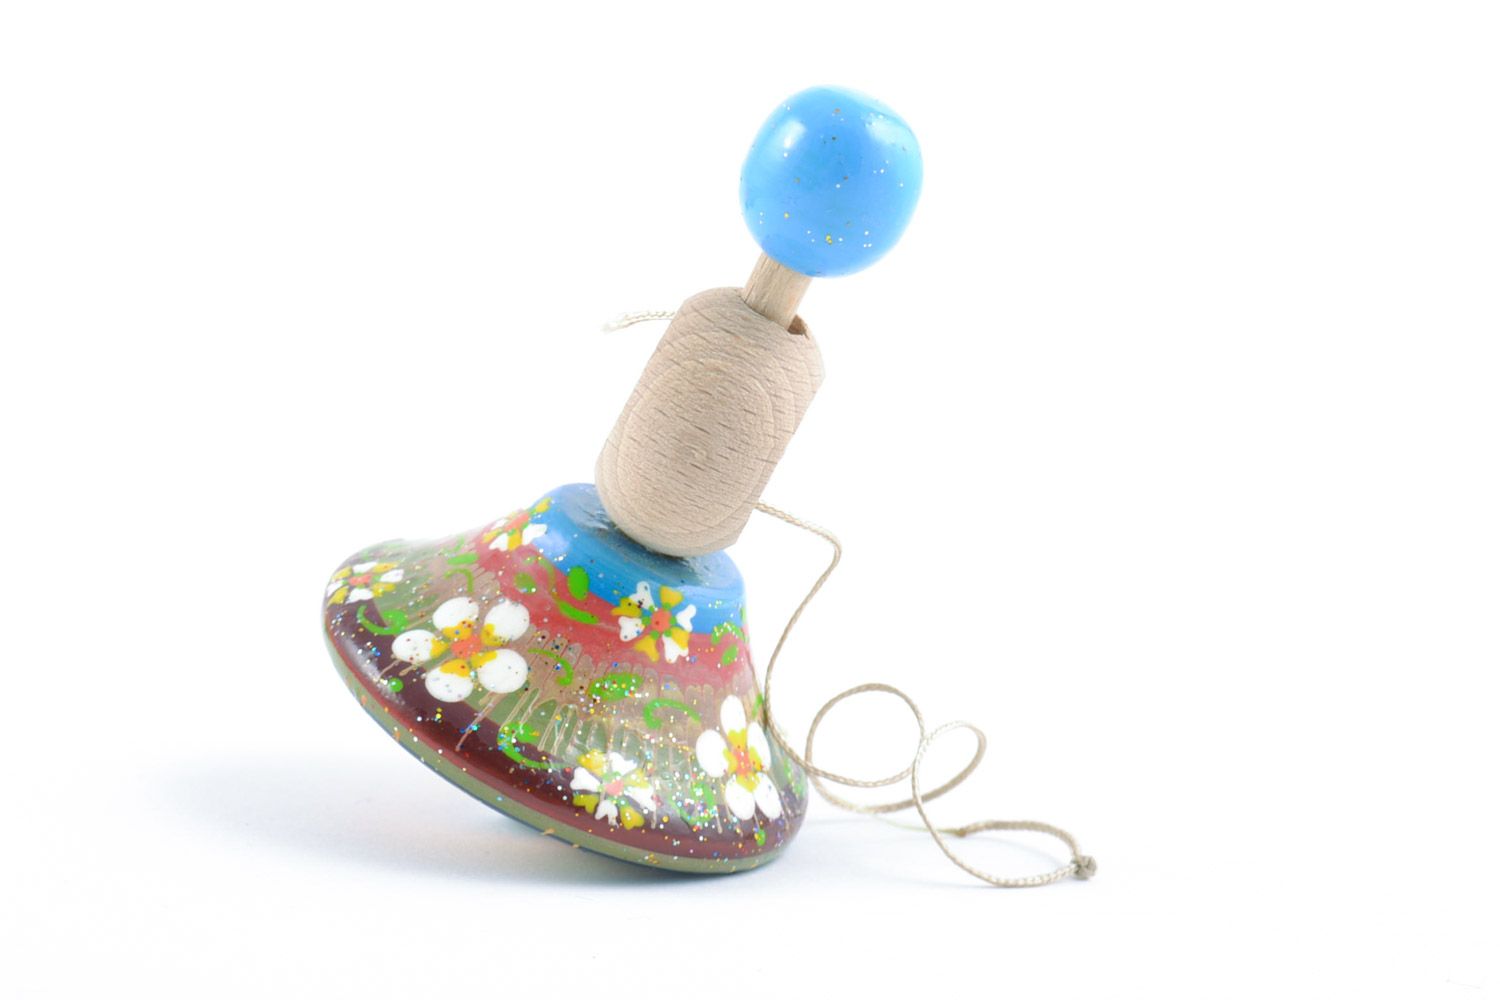 Painted handmade wooden spinning top toy for child made of natural materials photo 5